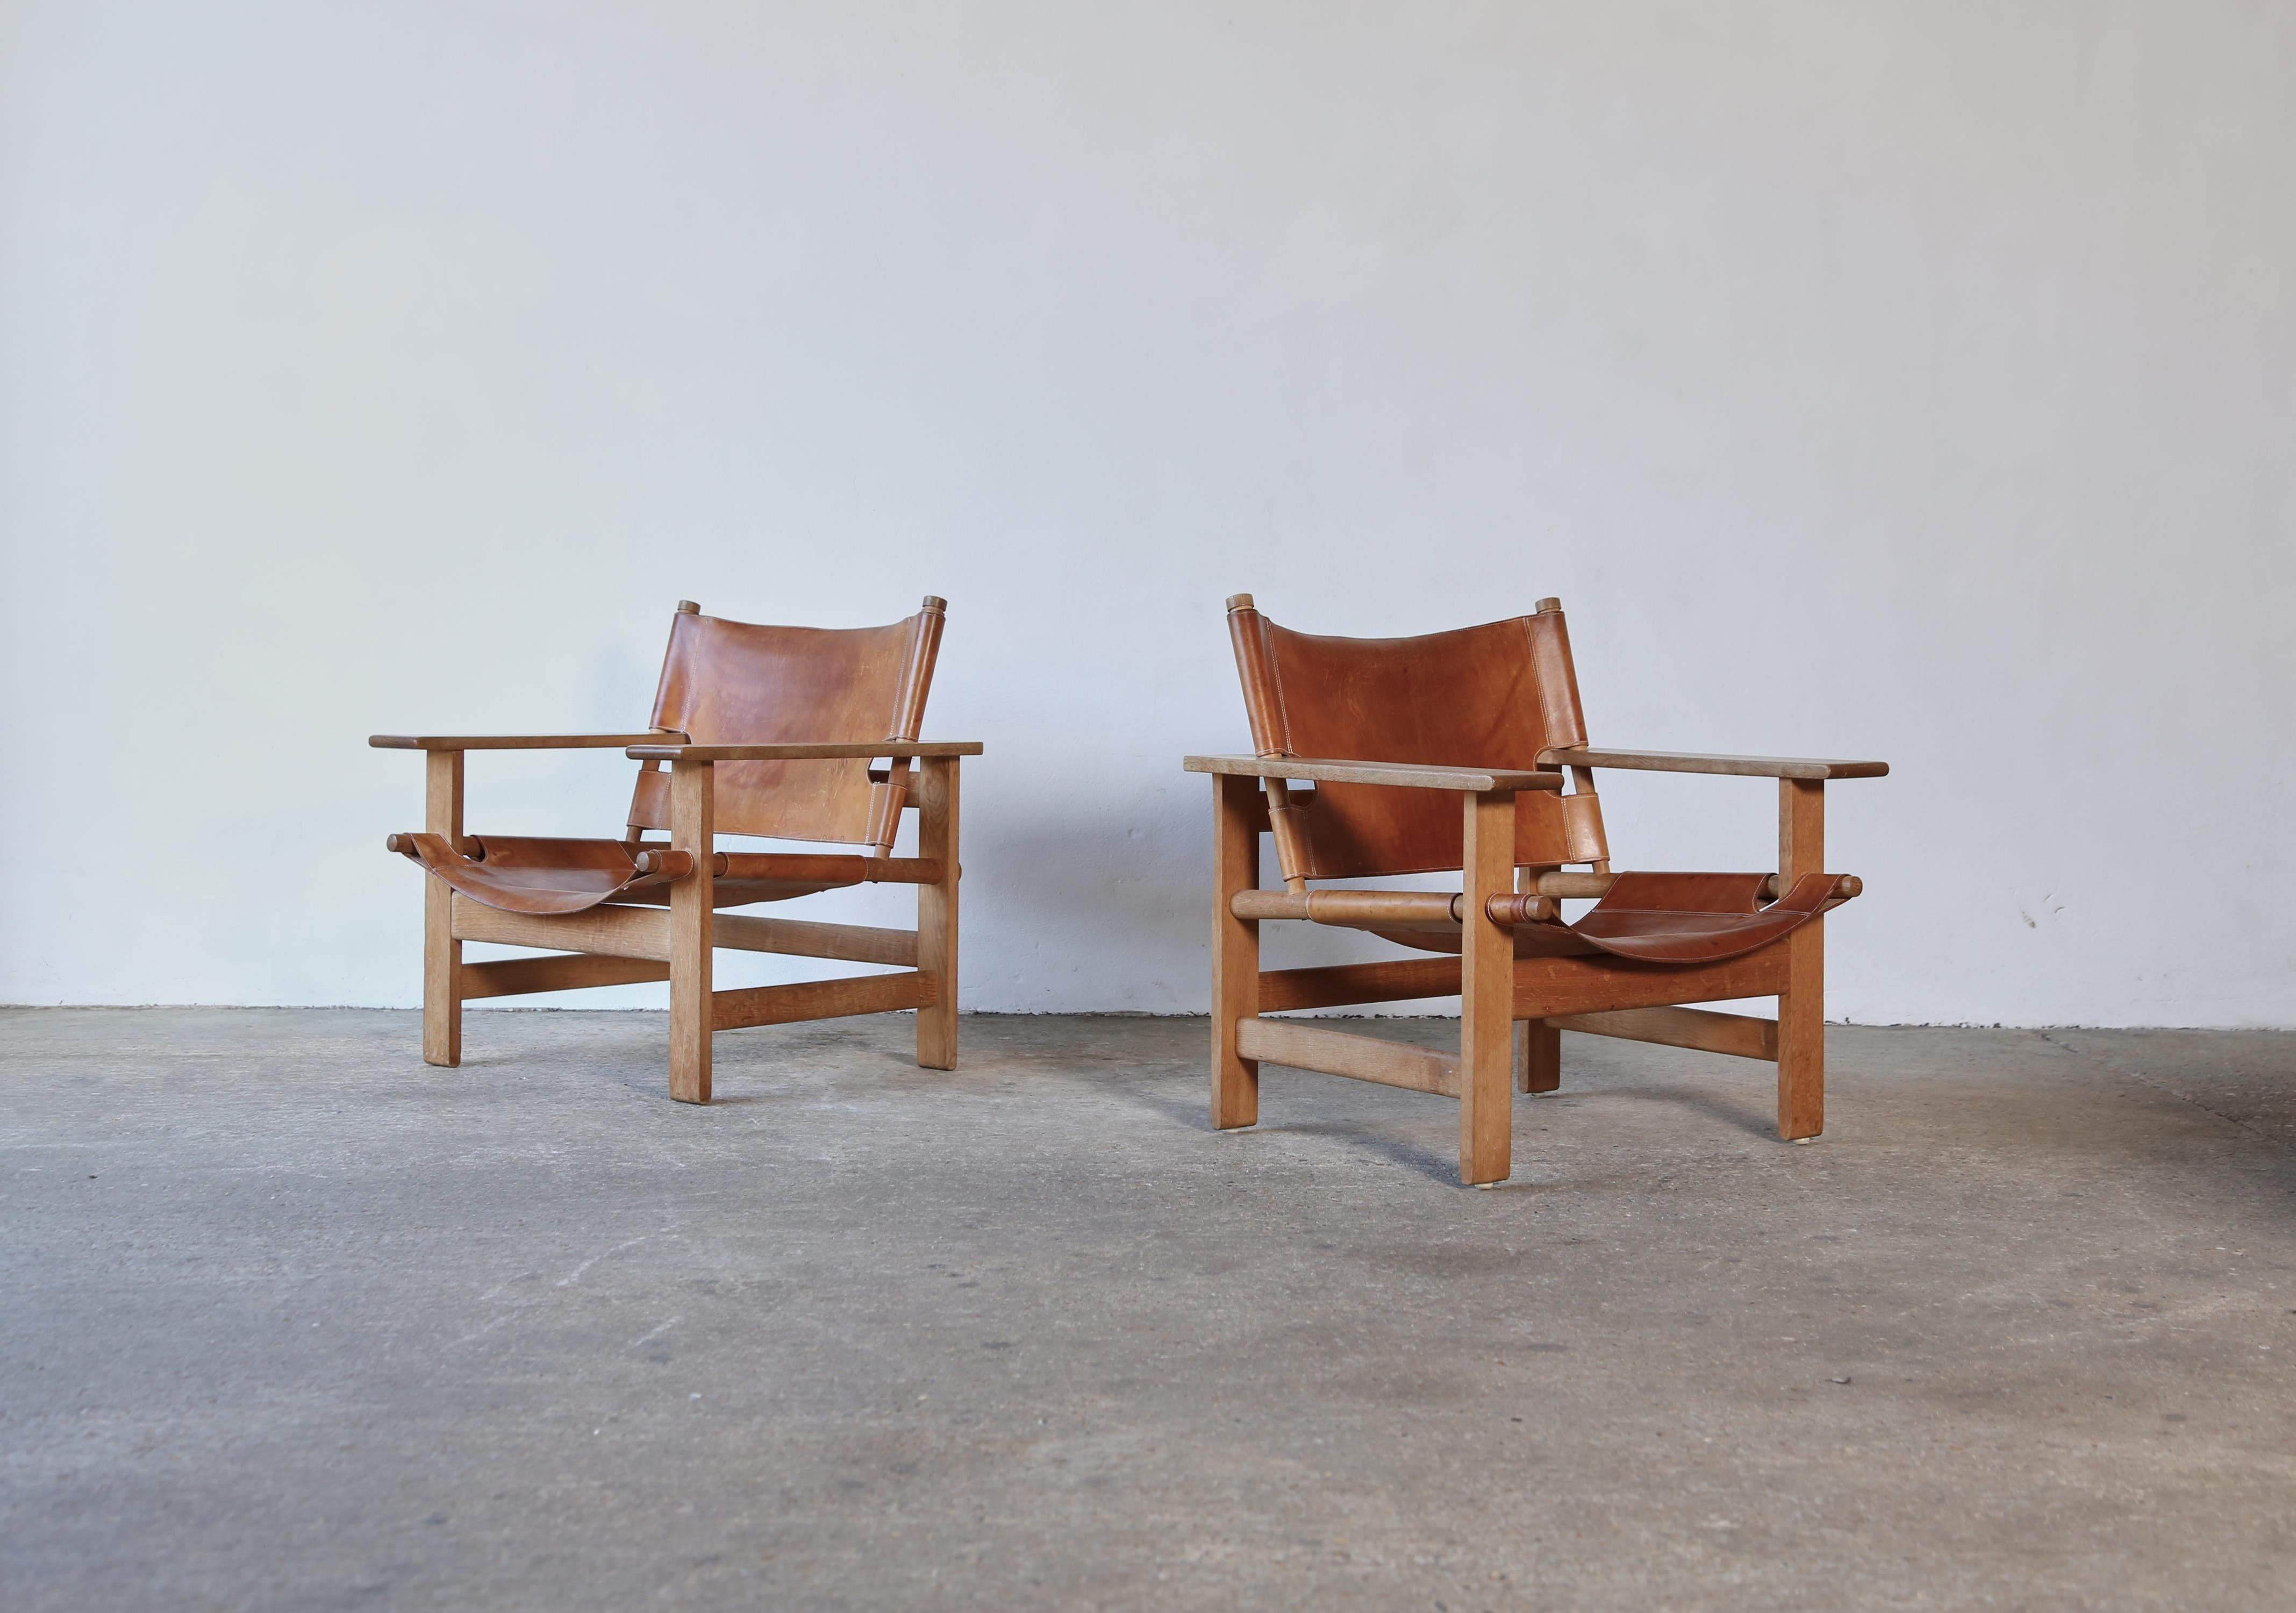 Extremely Rare Borge Mogensen Model 2231 Chairs, Denmark, 1960s. Original leather and oak. Original condition. Incredible tone and patina.



